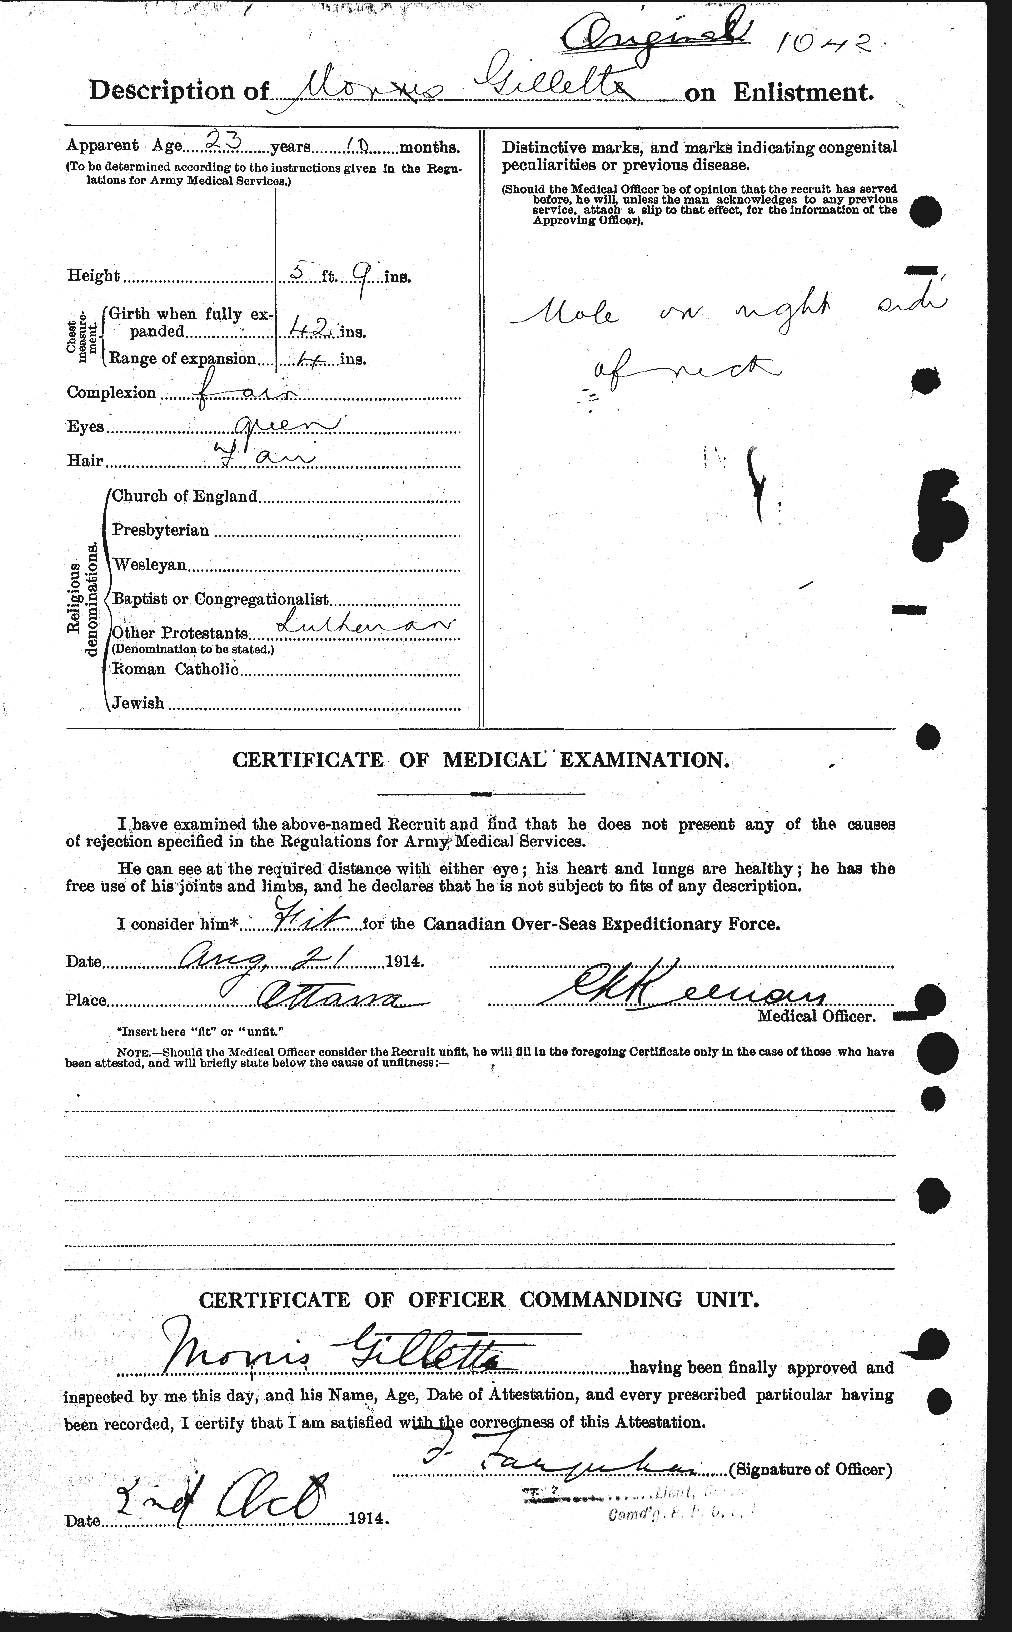 Personnel Records of the First World War - CEF 350390b